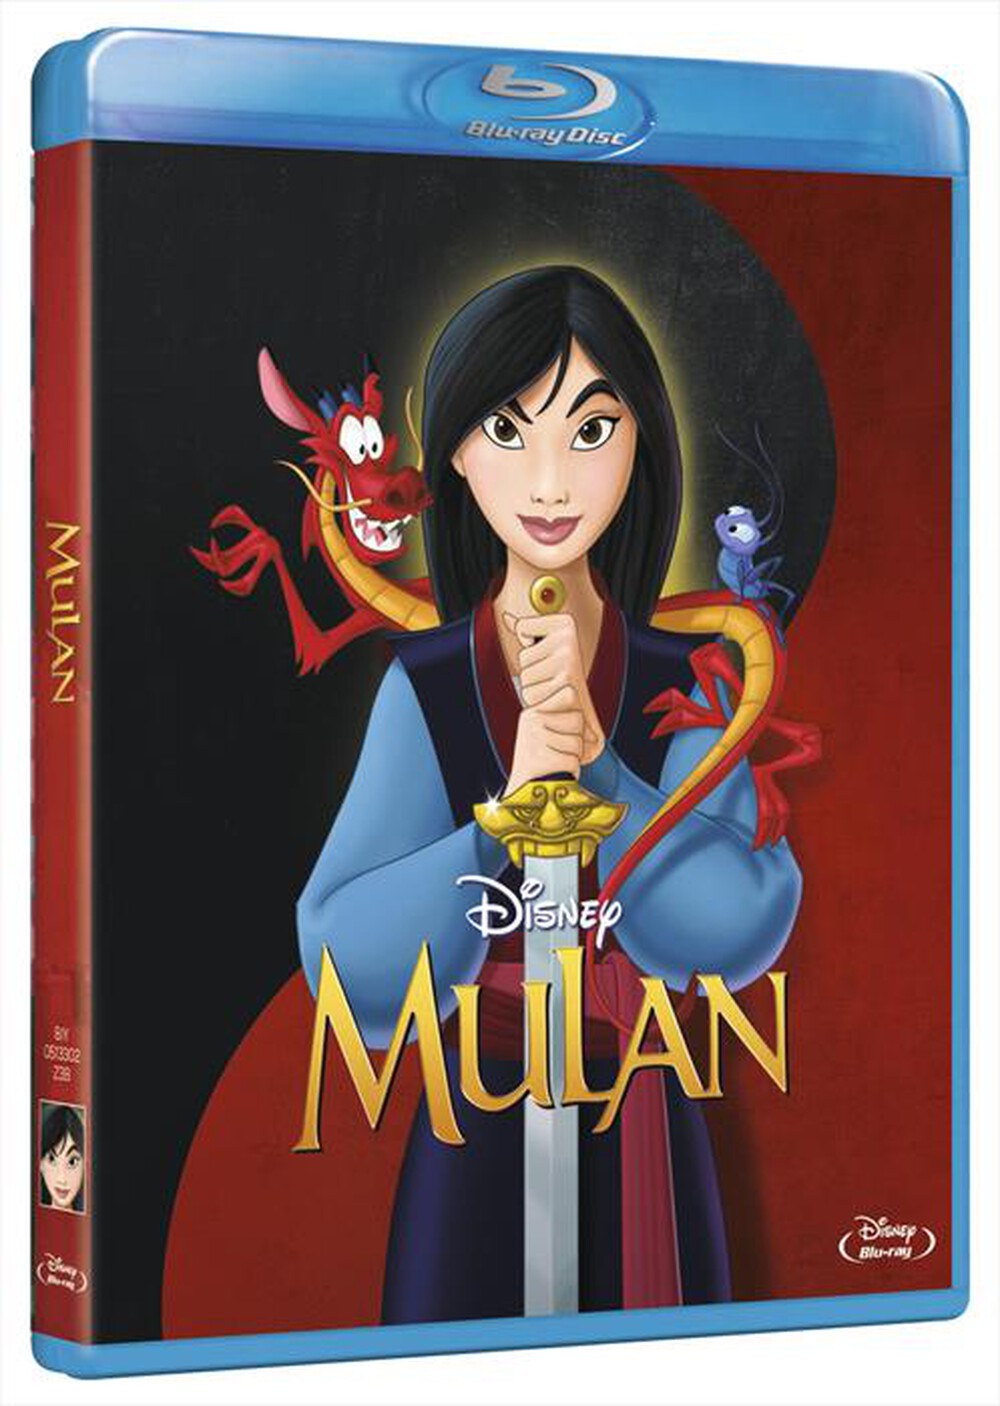 "EAGLE PICTURES - Mulan"